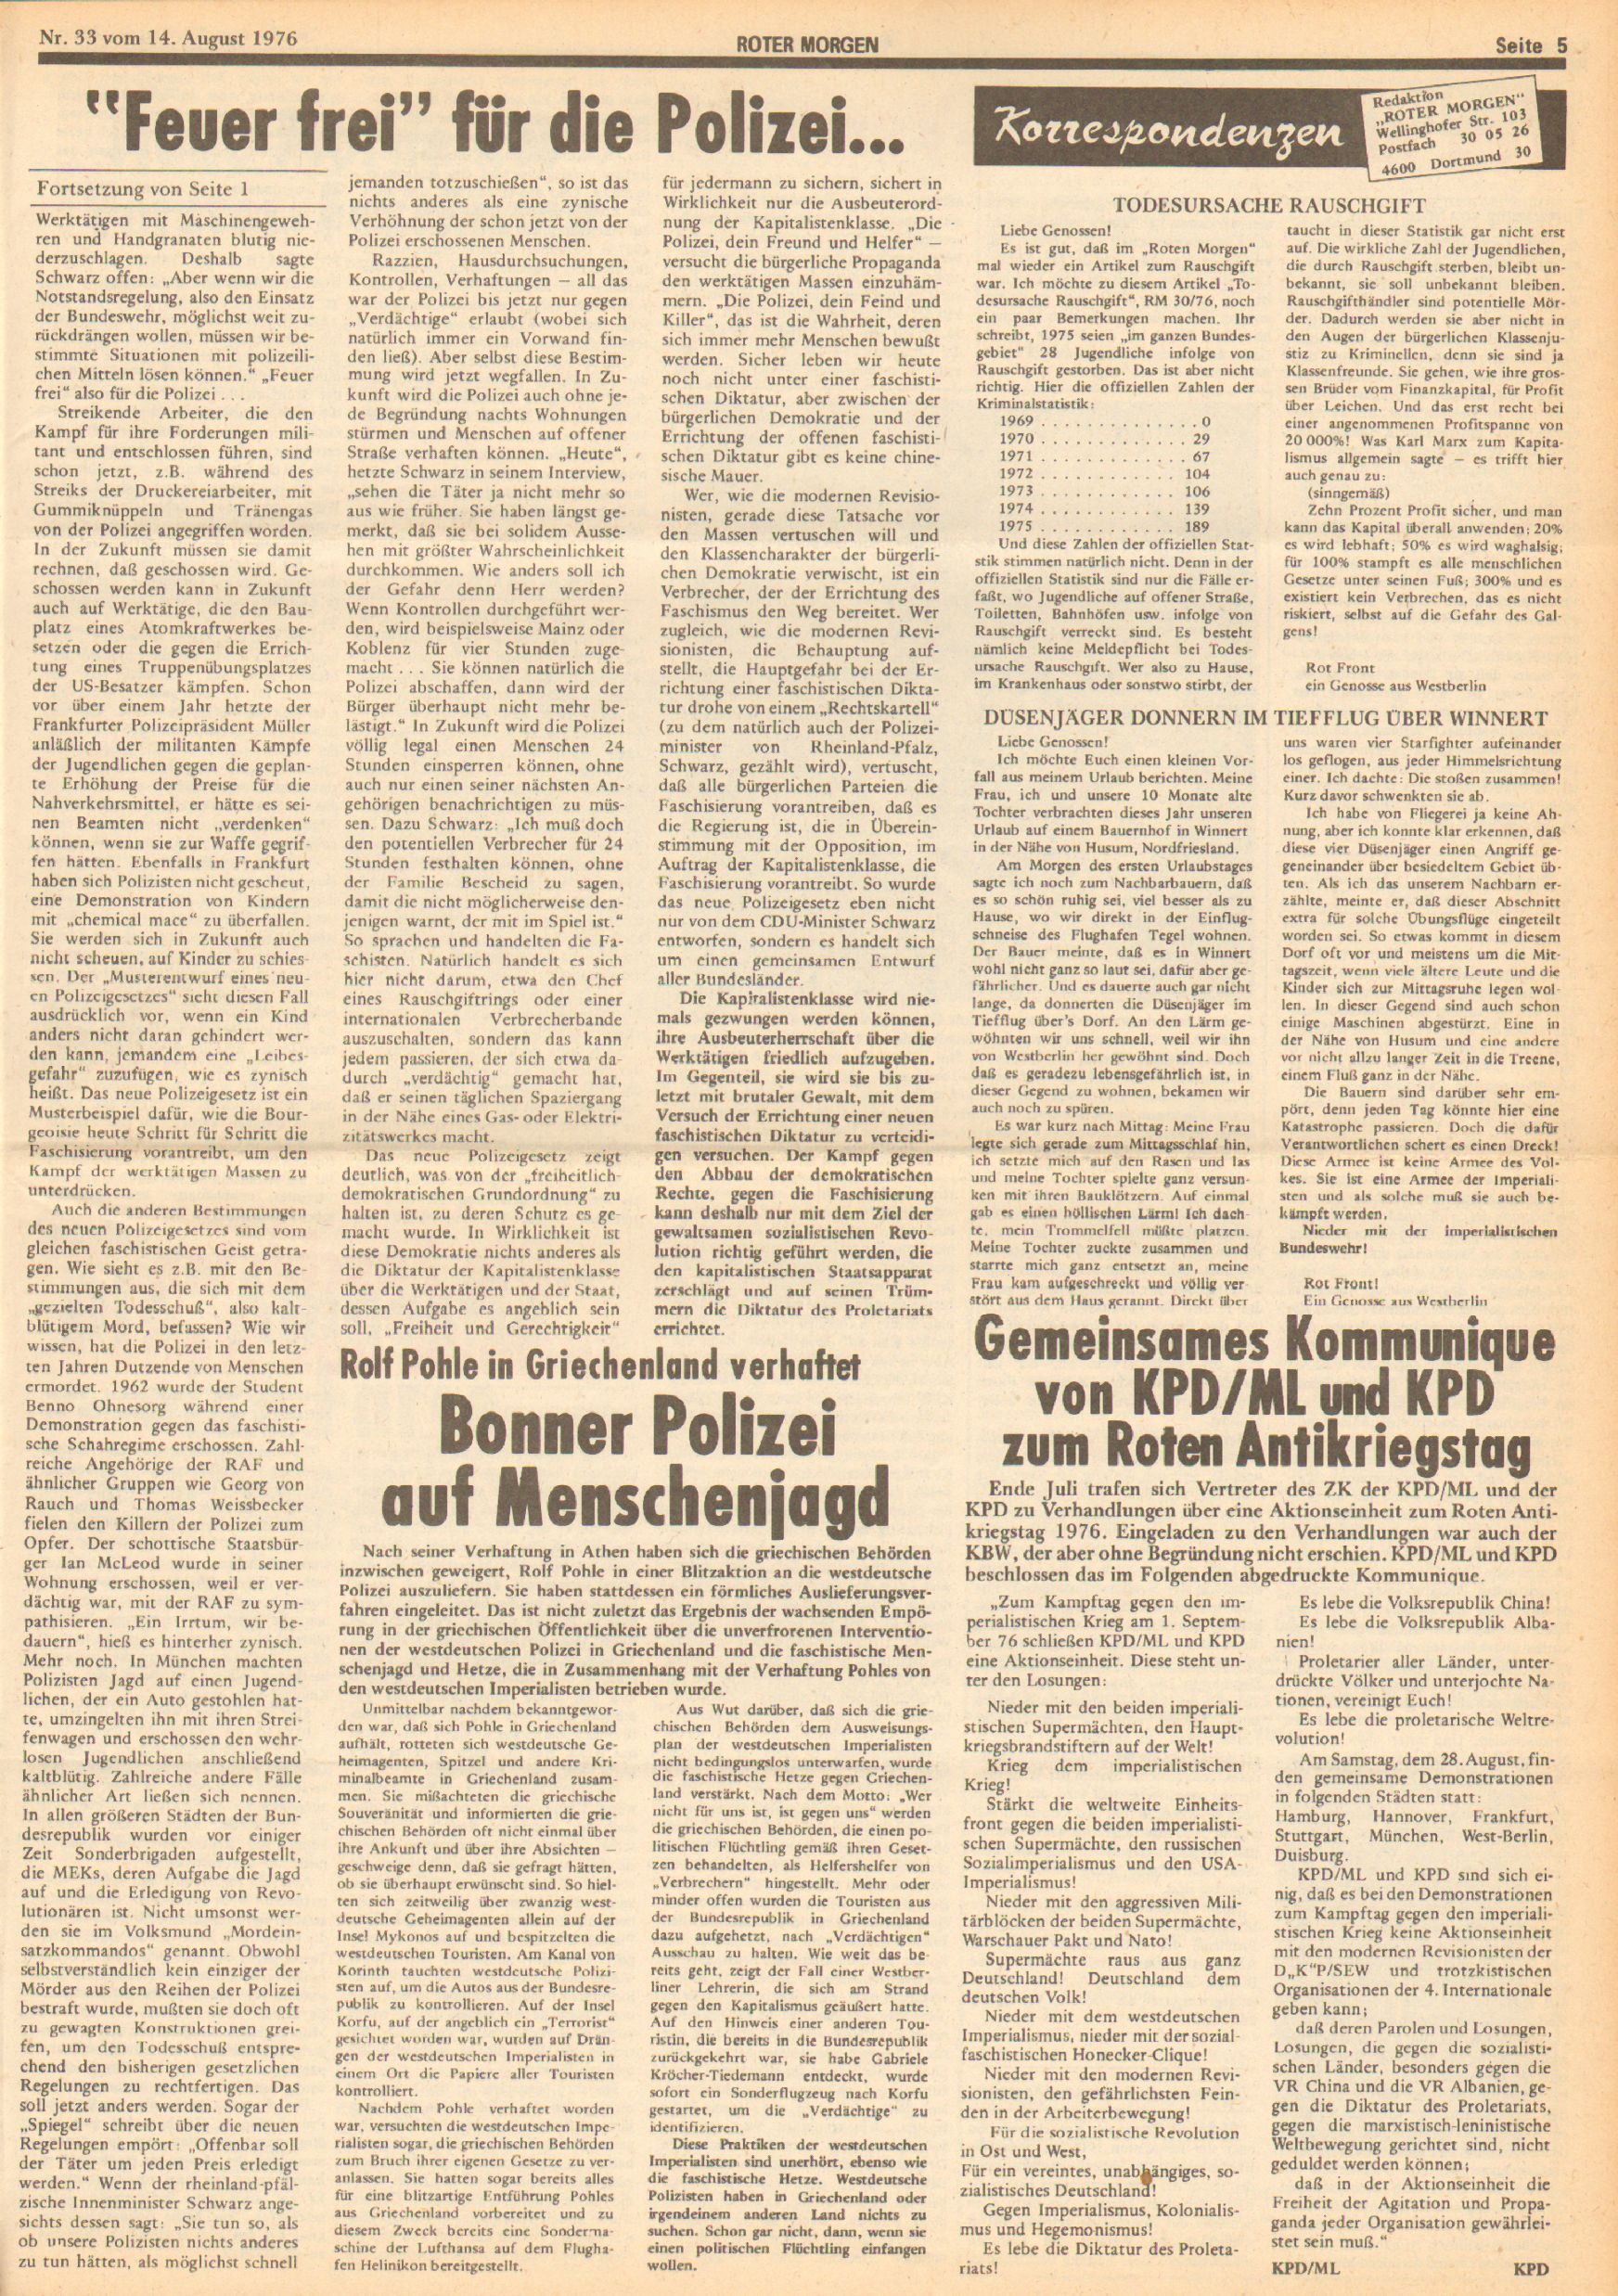 Roter Morgen, 10. Jg., 14. August 1976, Nr. 33, Seite 5